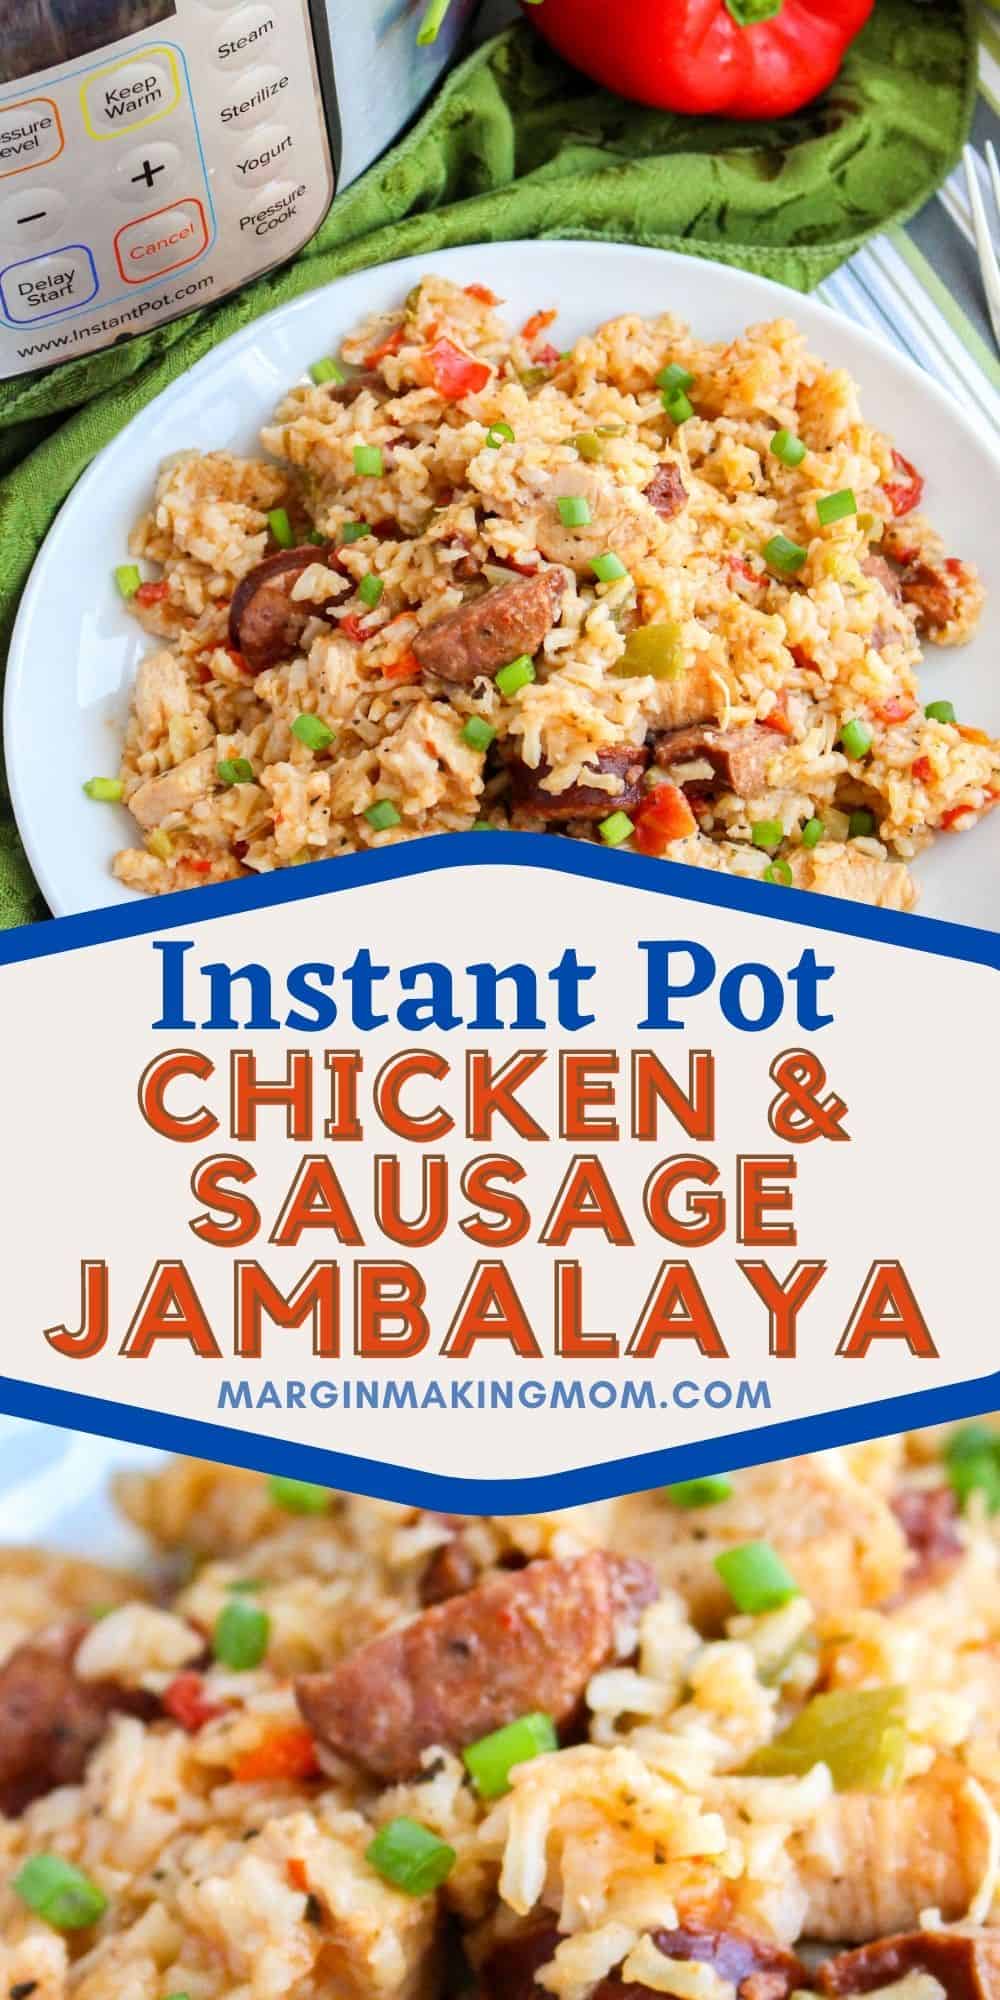 collage image including two photos of Instant Pot jambalaya--one is a close-up of the dish and the other is zoomed out